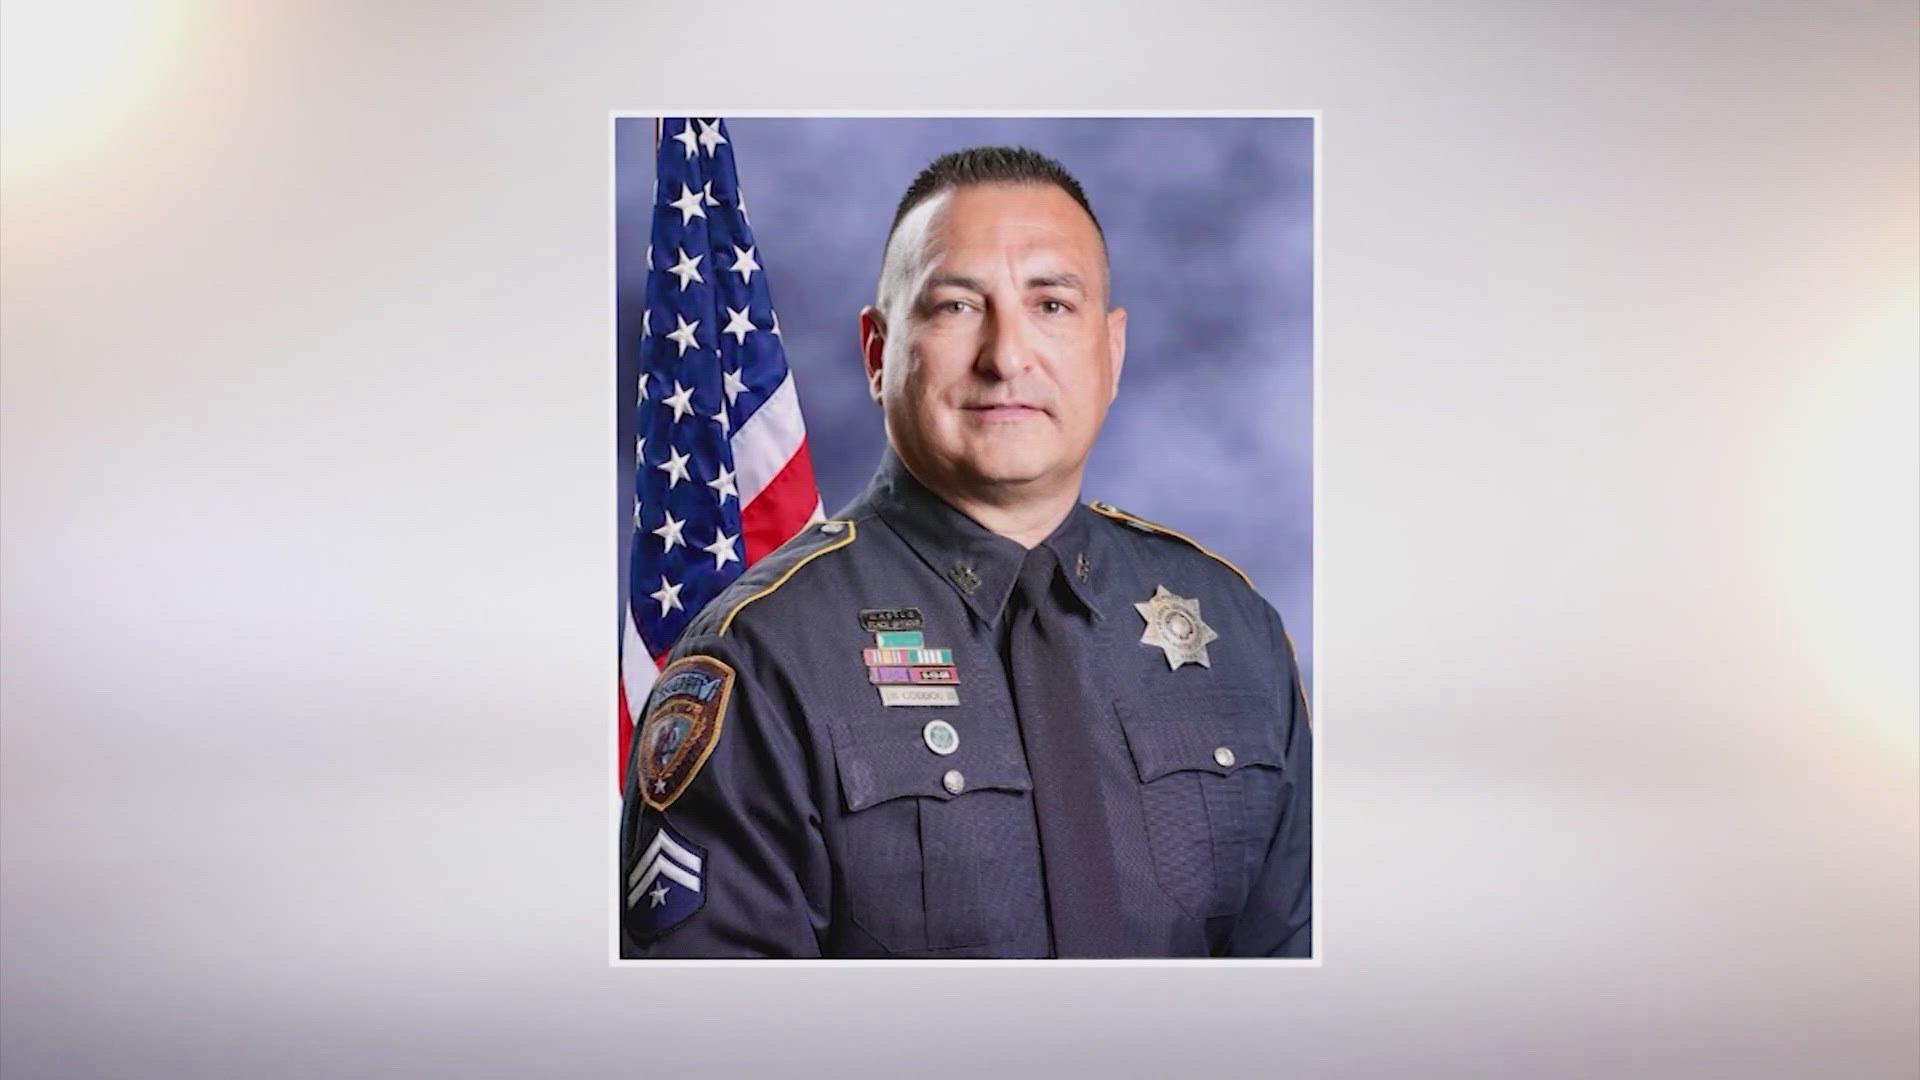 "We are grateful for the outpouring of support for our fallen brother, Deputy Coddou's family, friends and teammates," the sheriff wrote in a post on X.